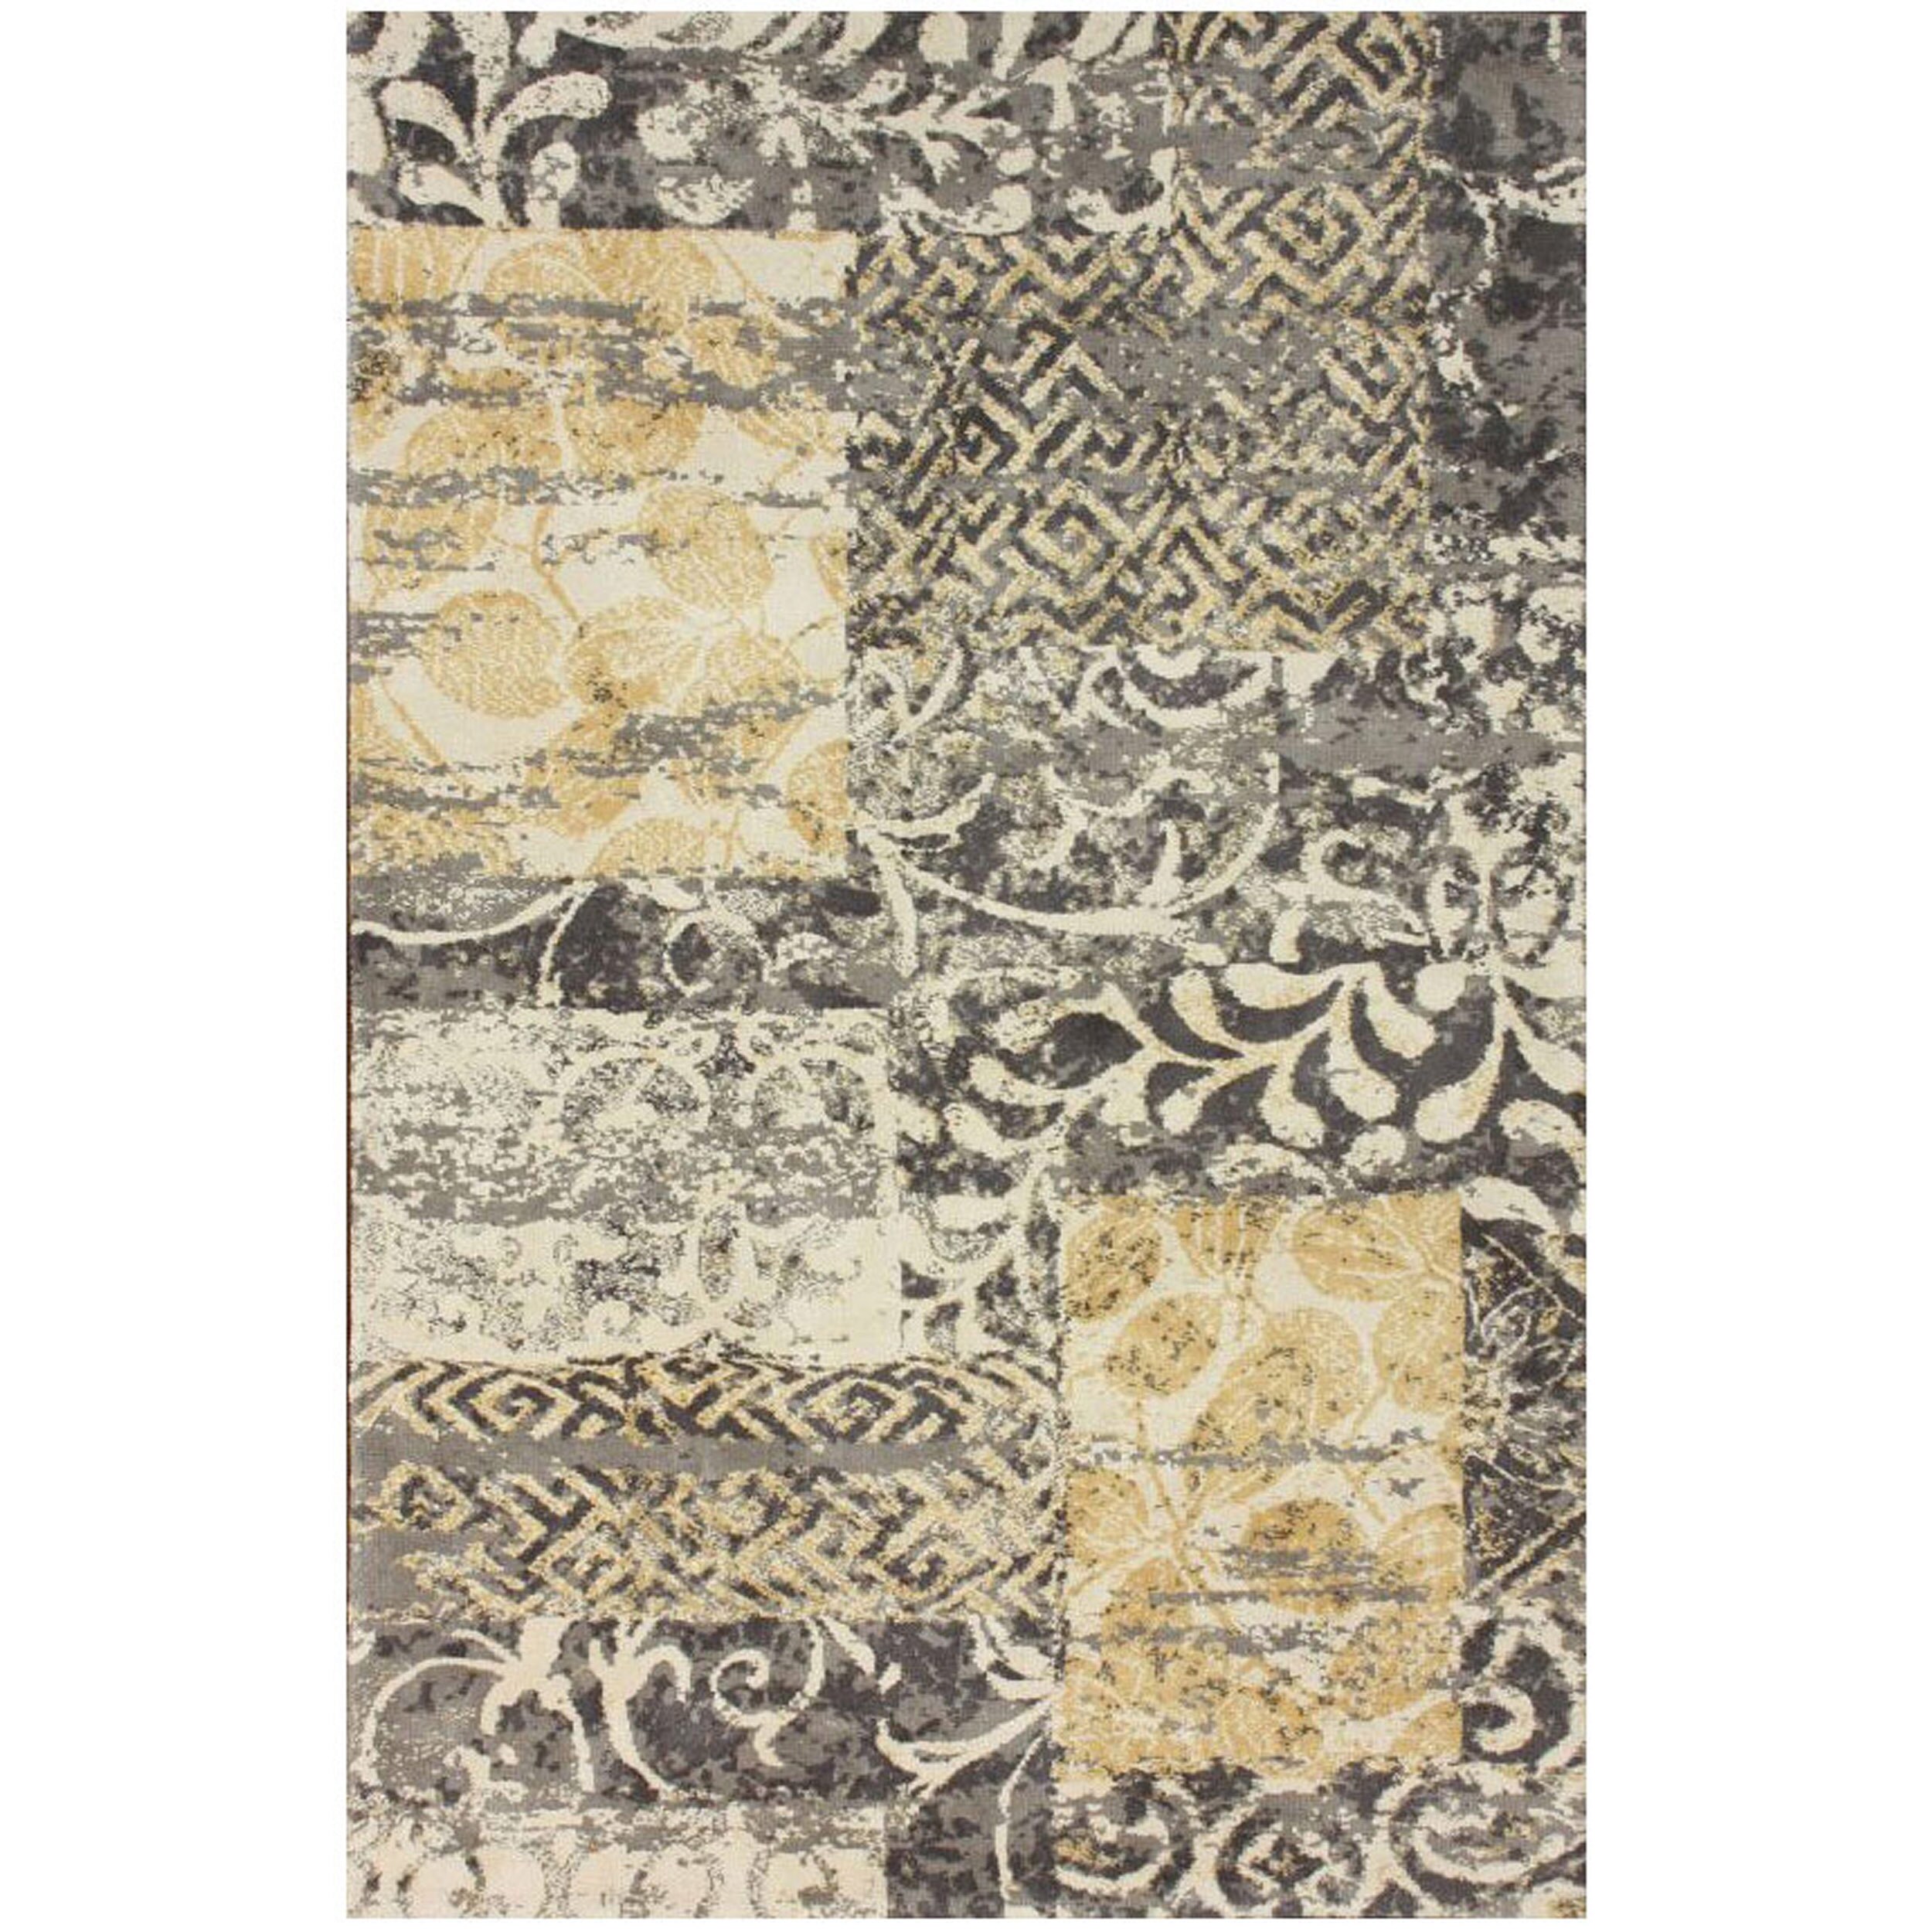 Nuloom Collage Patchwork Grey Microfiber Rug (5 X 8) (MultiPattern AbstractTip We recommend the use of a non skid pad to keep the rug in place on smooth surfaces.All rug sizes are approximate. Due to the difference of monitor colors, some rug colors may